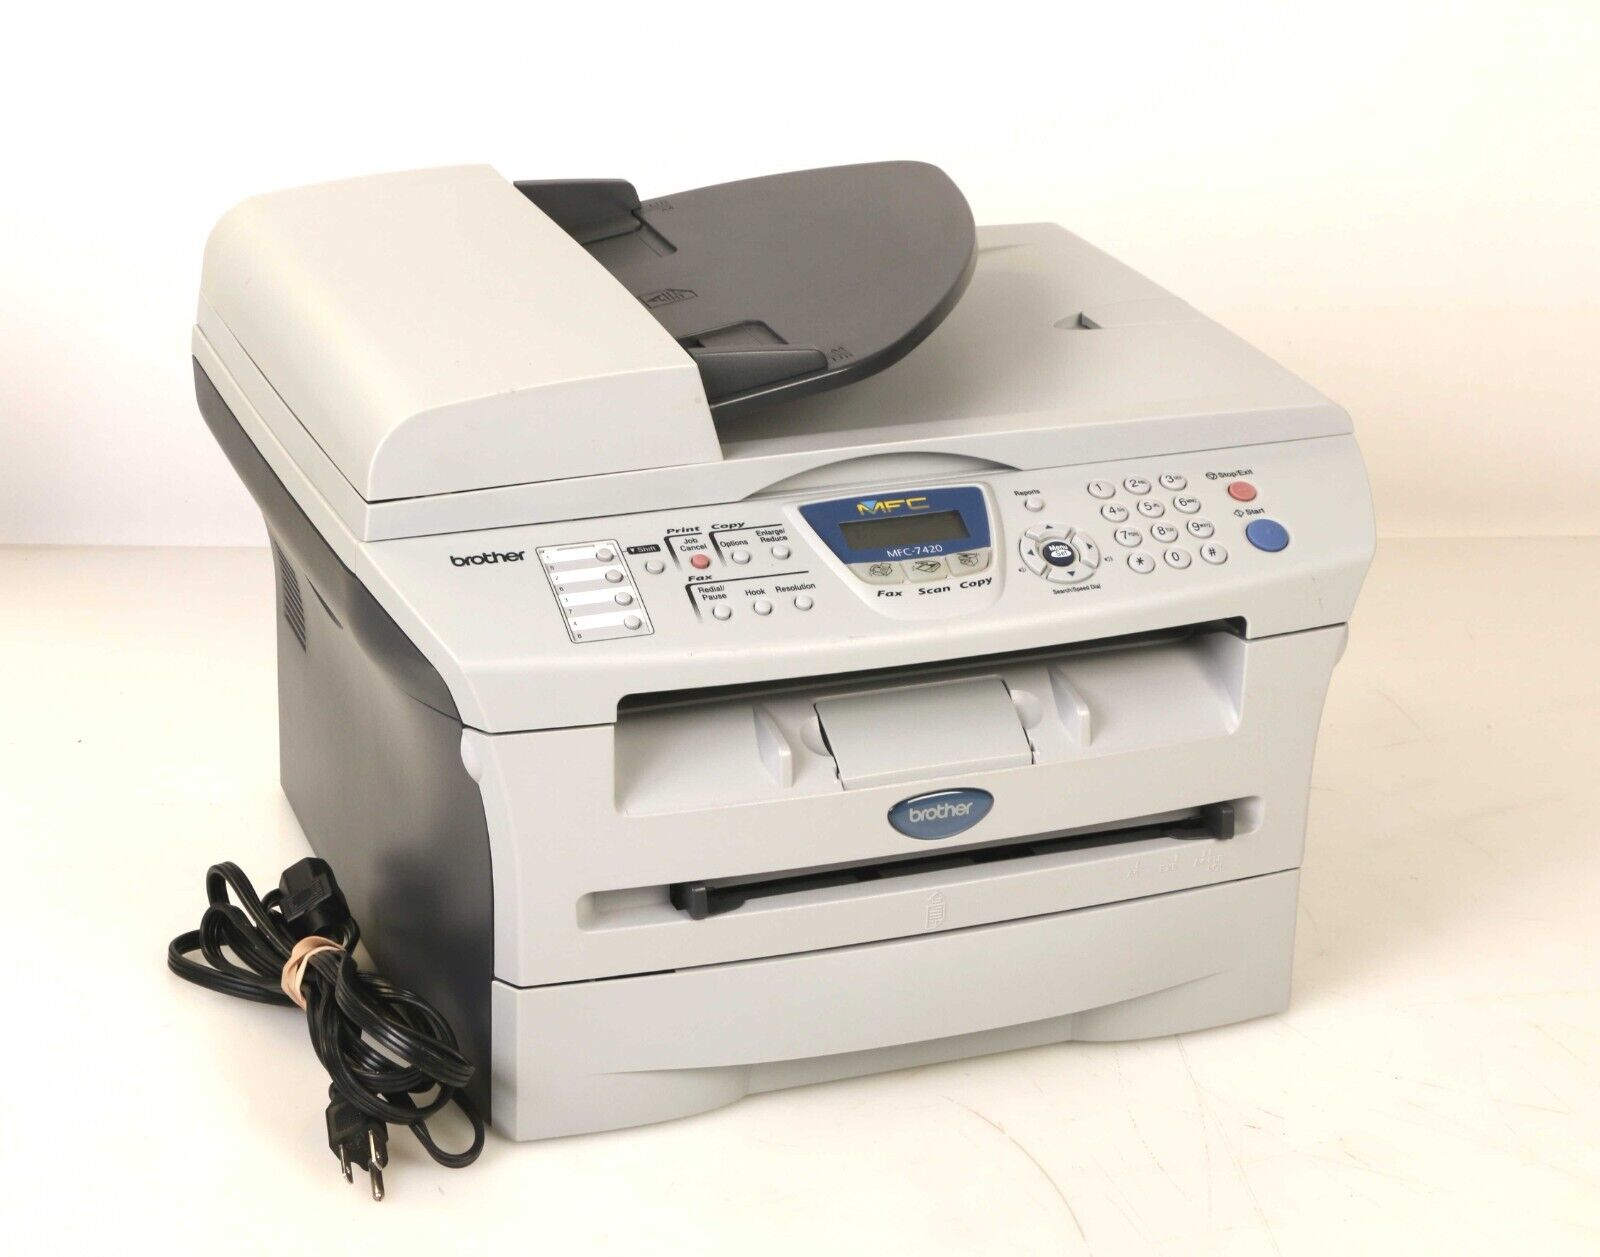 Brother MFC-7420 All-In-One Laser B&W Printer A1 FULLY TESTED Page Count 2868